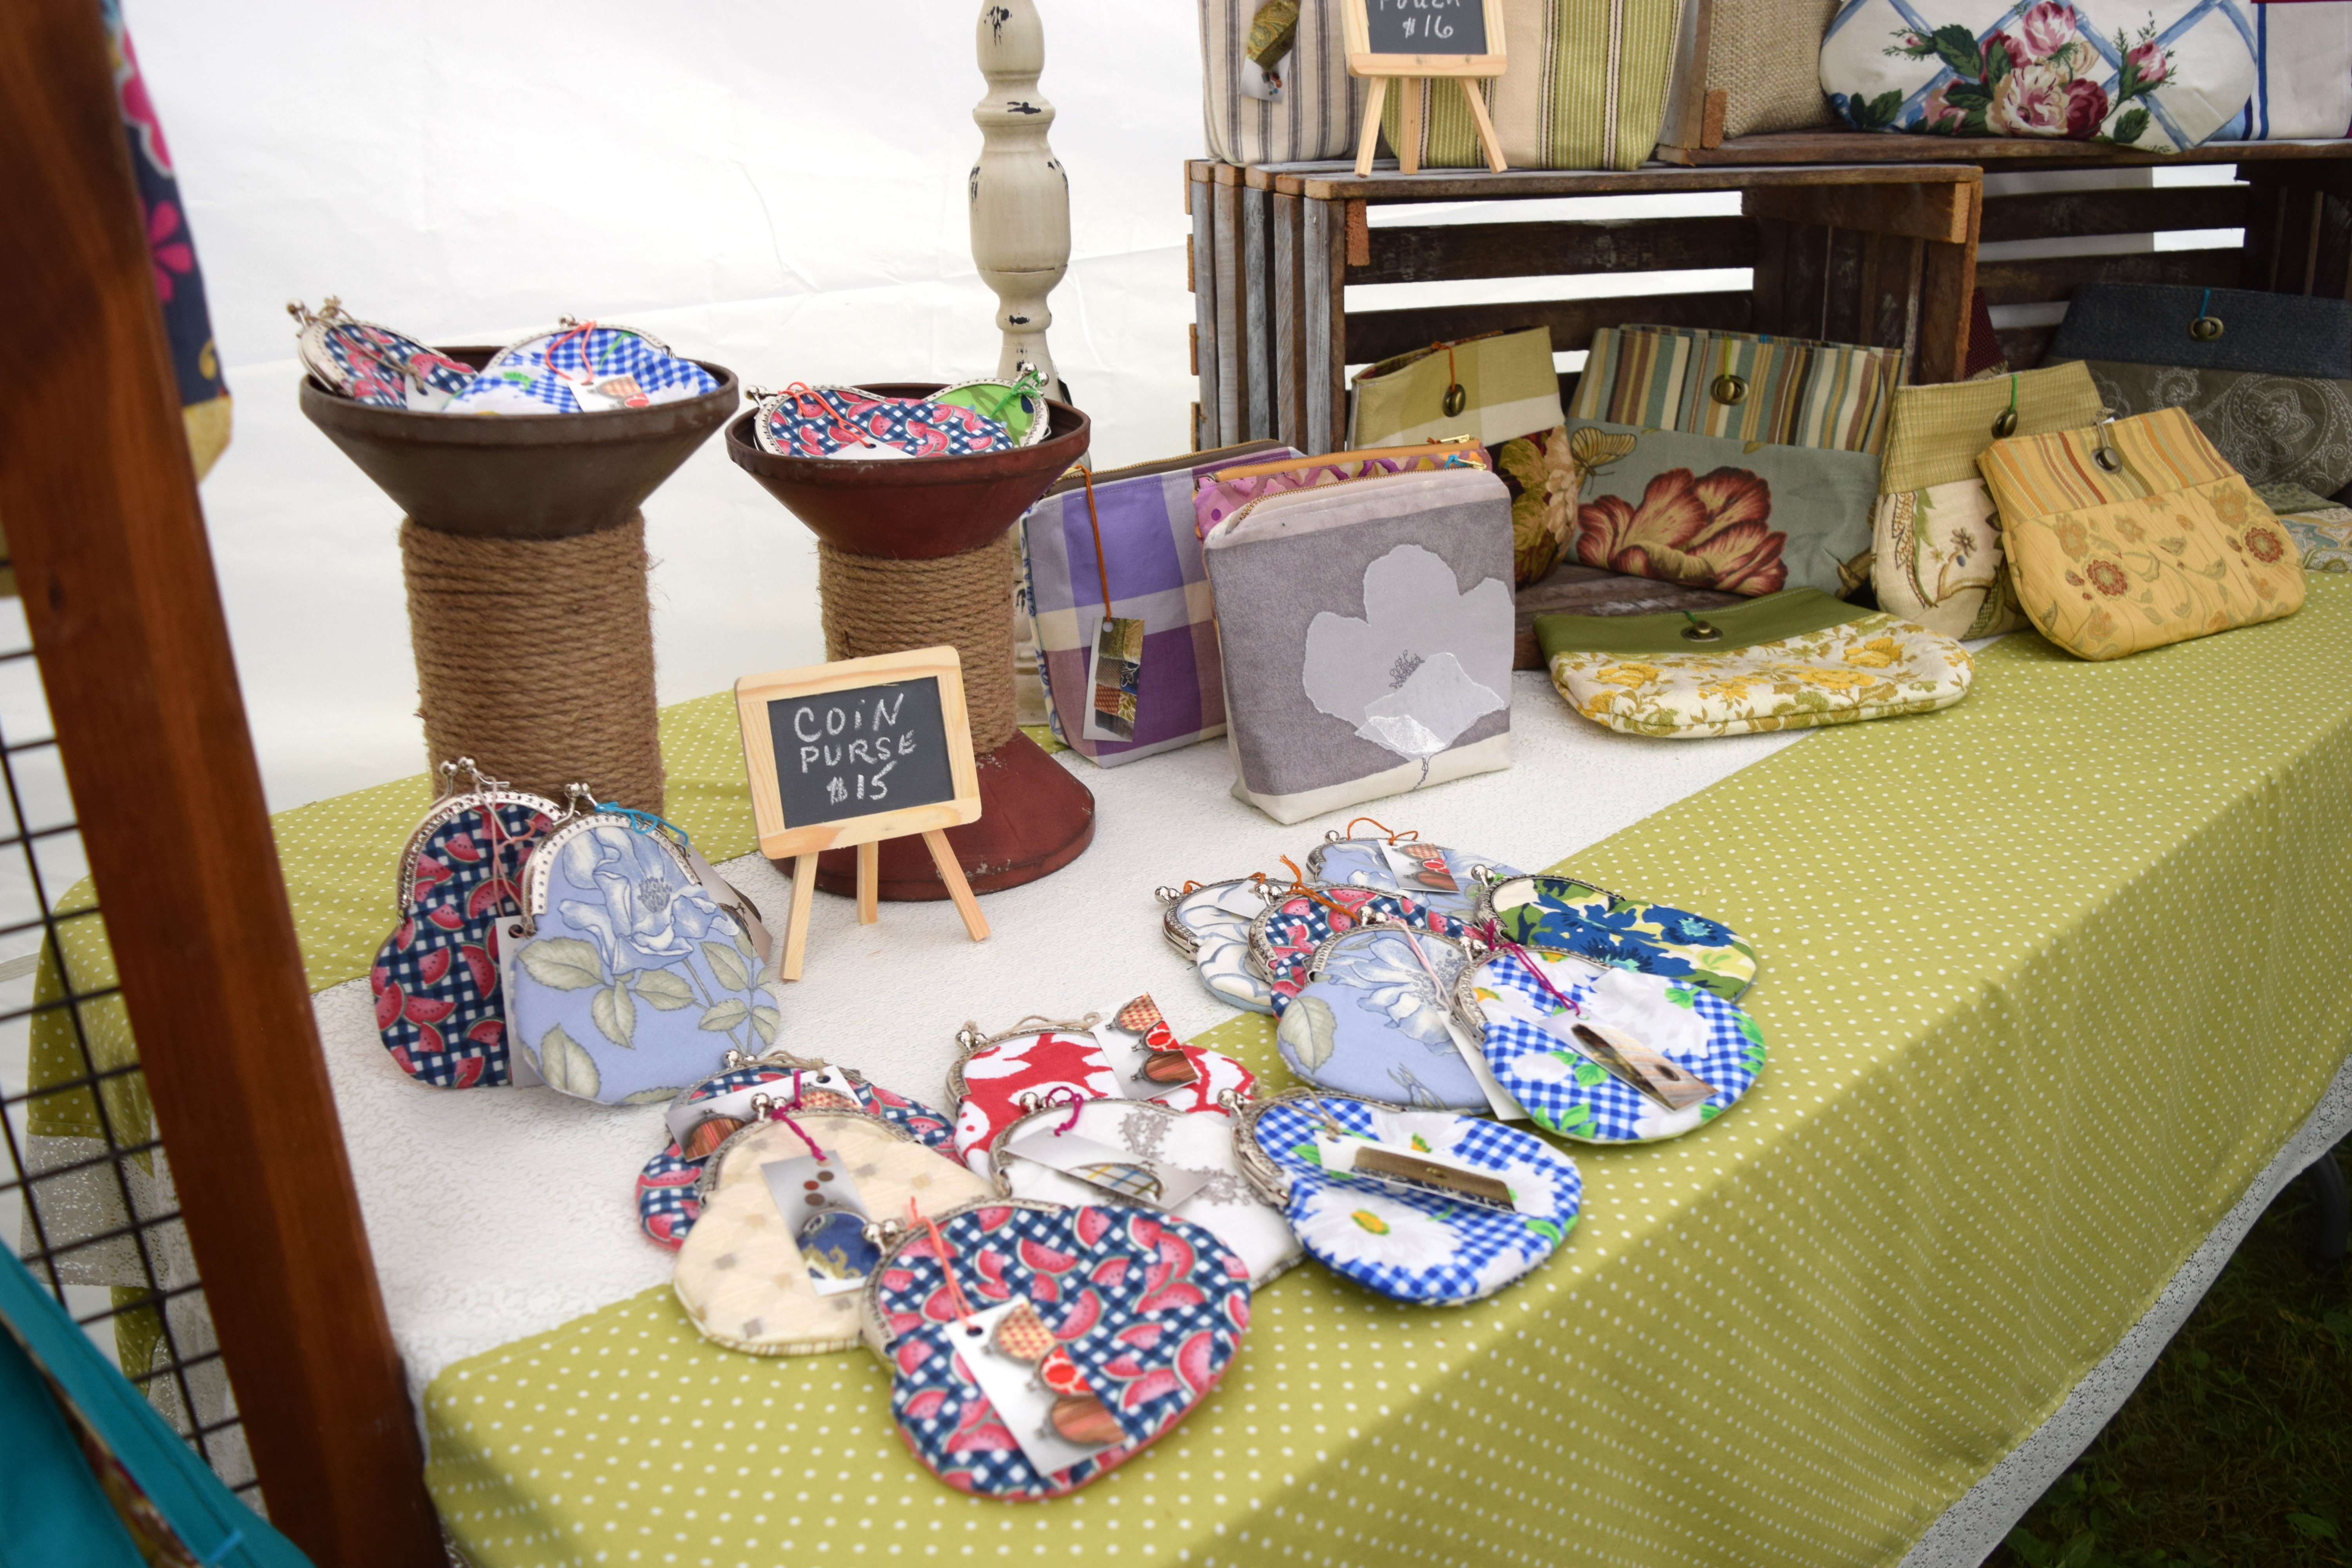 Trish Stitched Craft Show Booth Display - Handmade Bags